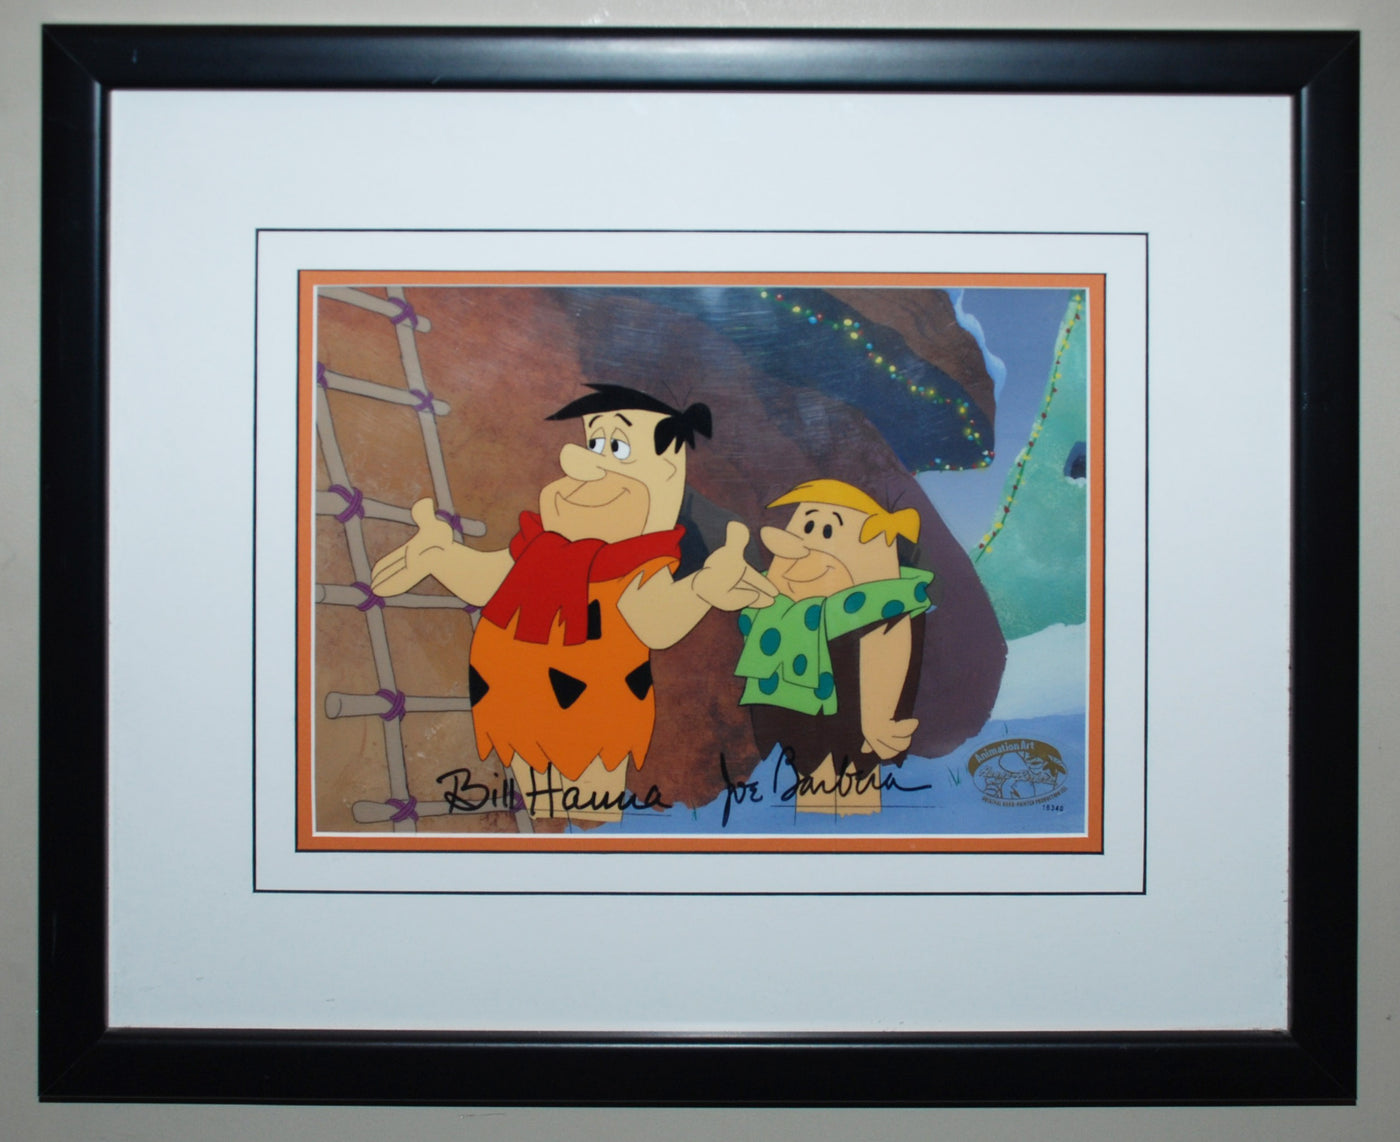 Hanna Barbera Production Cel from The Flintstones featuring Fred and Barney